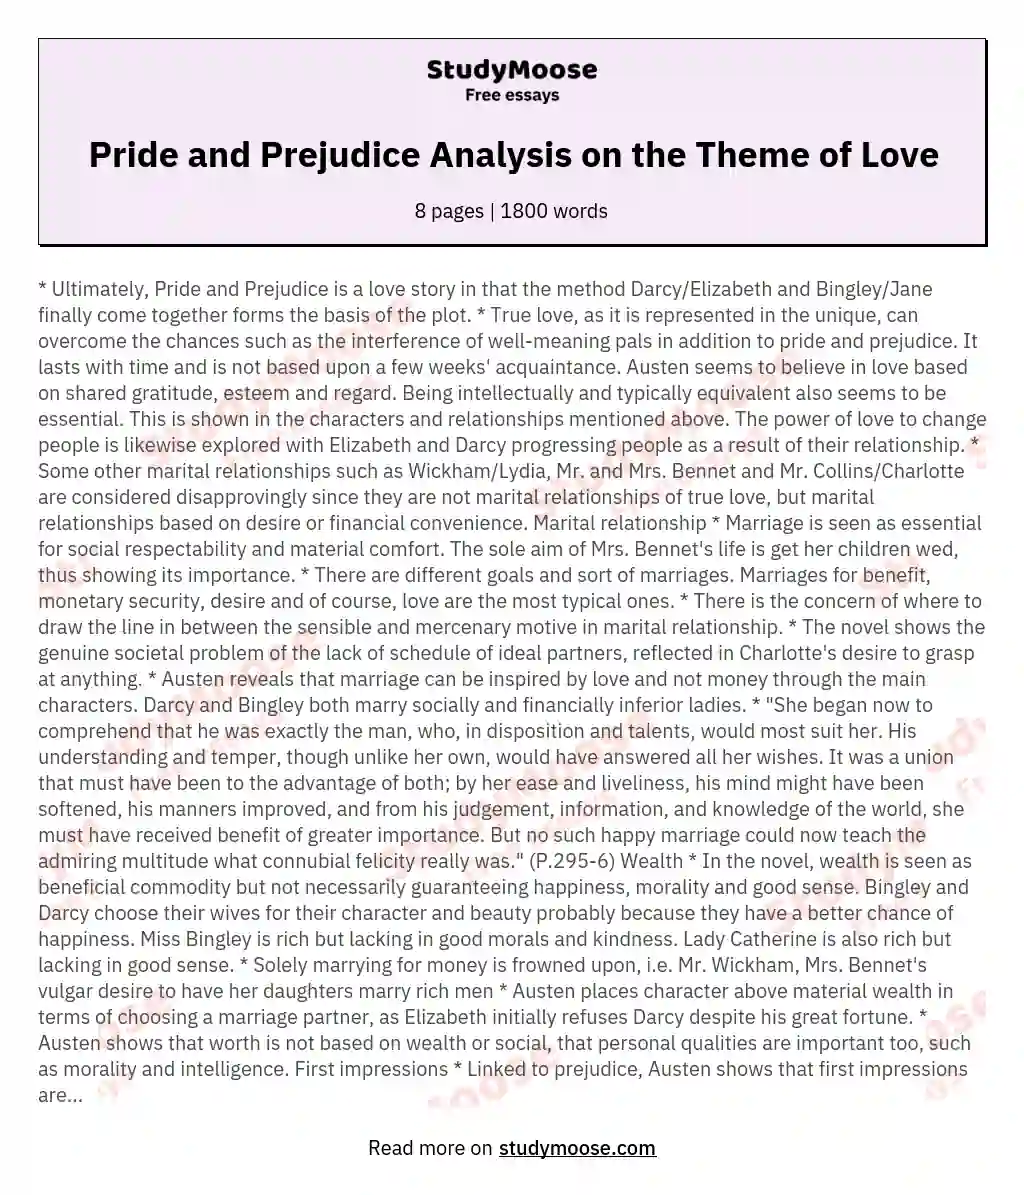 Pride and Prejudice Analysis on the Theme of Love essay